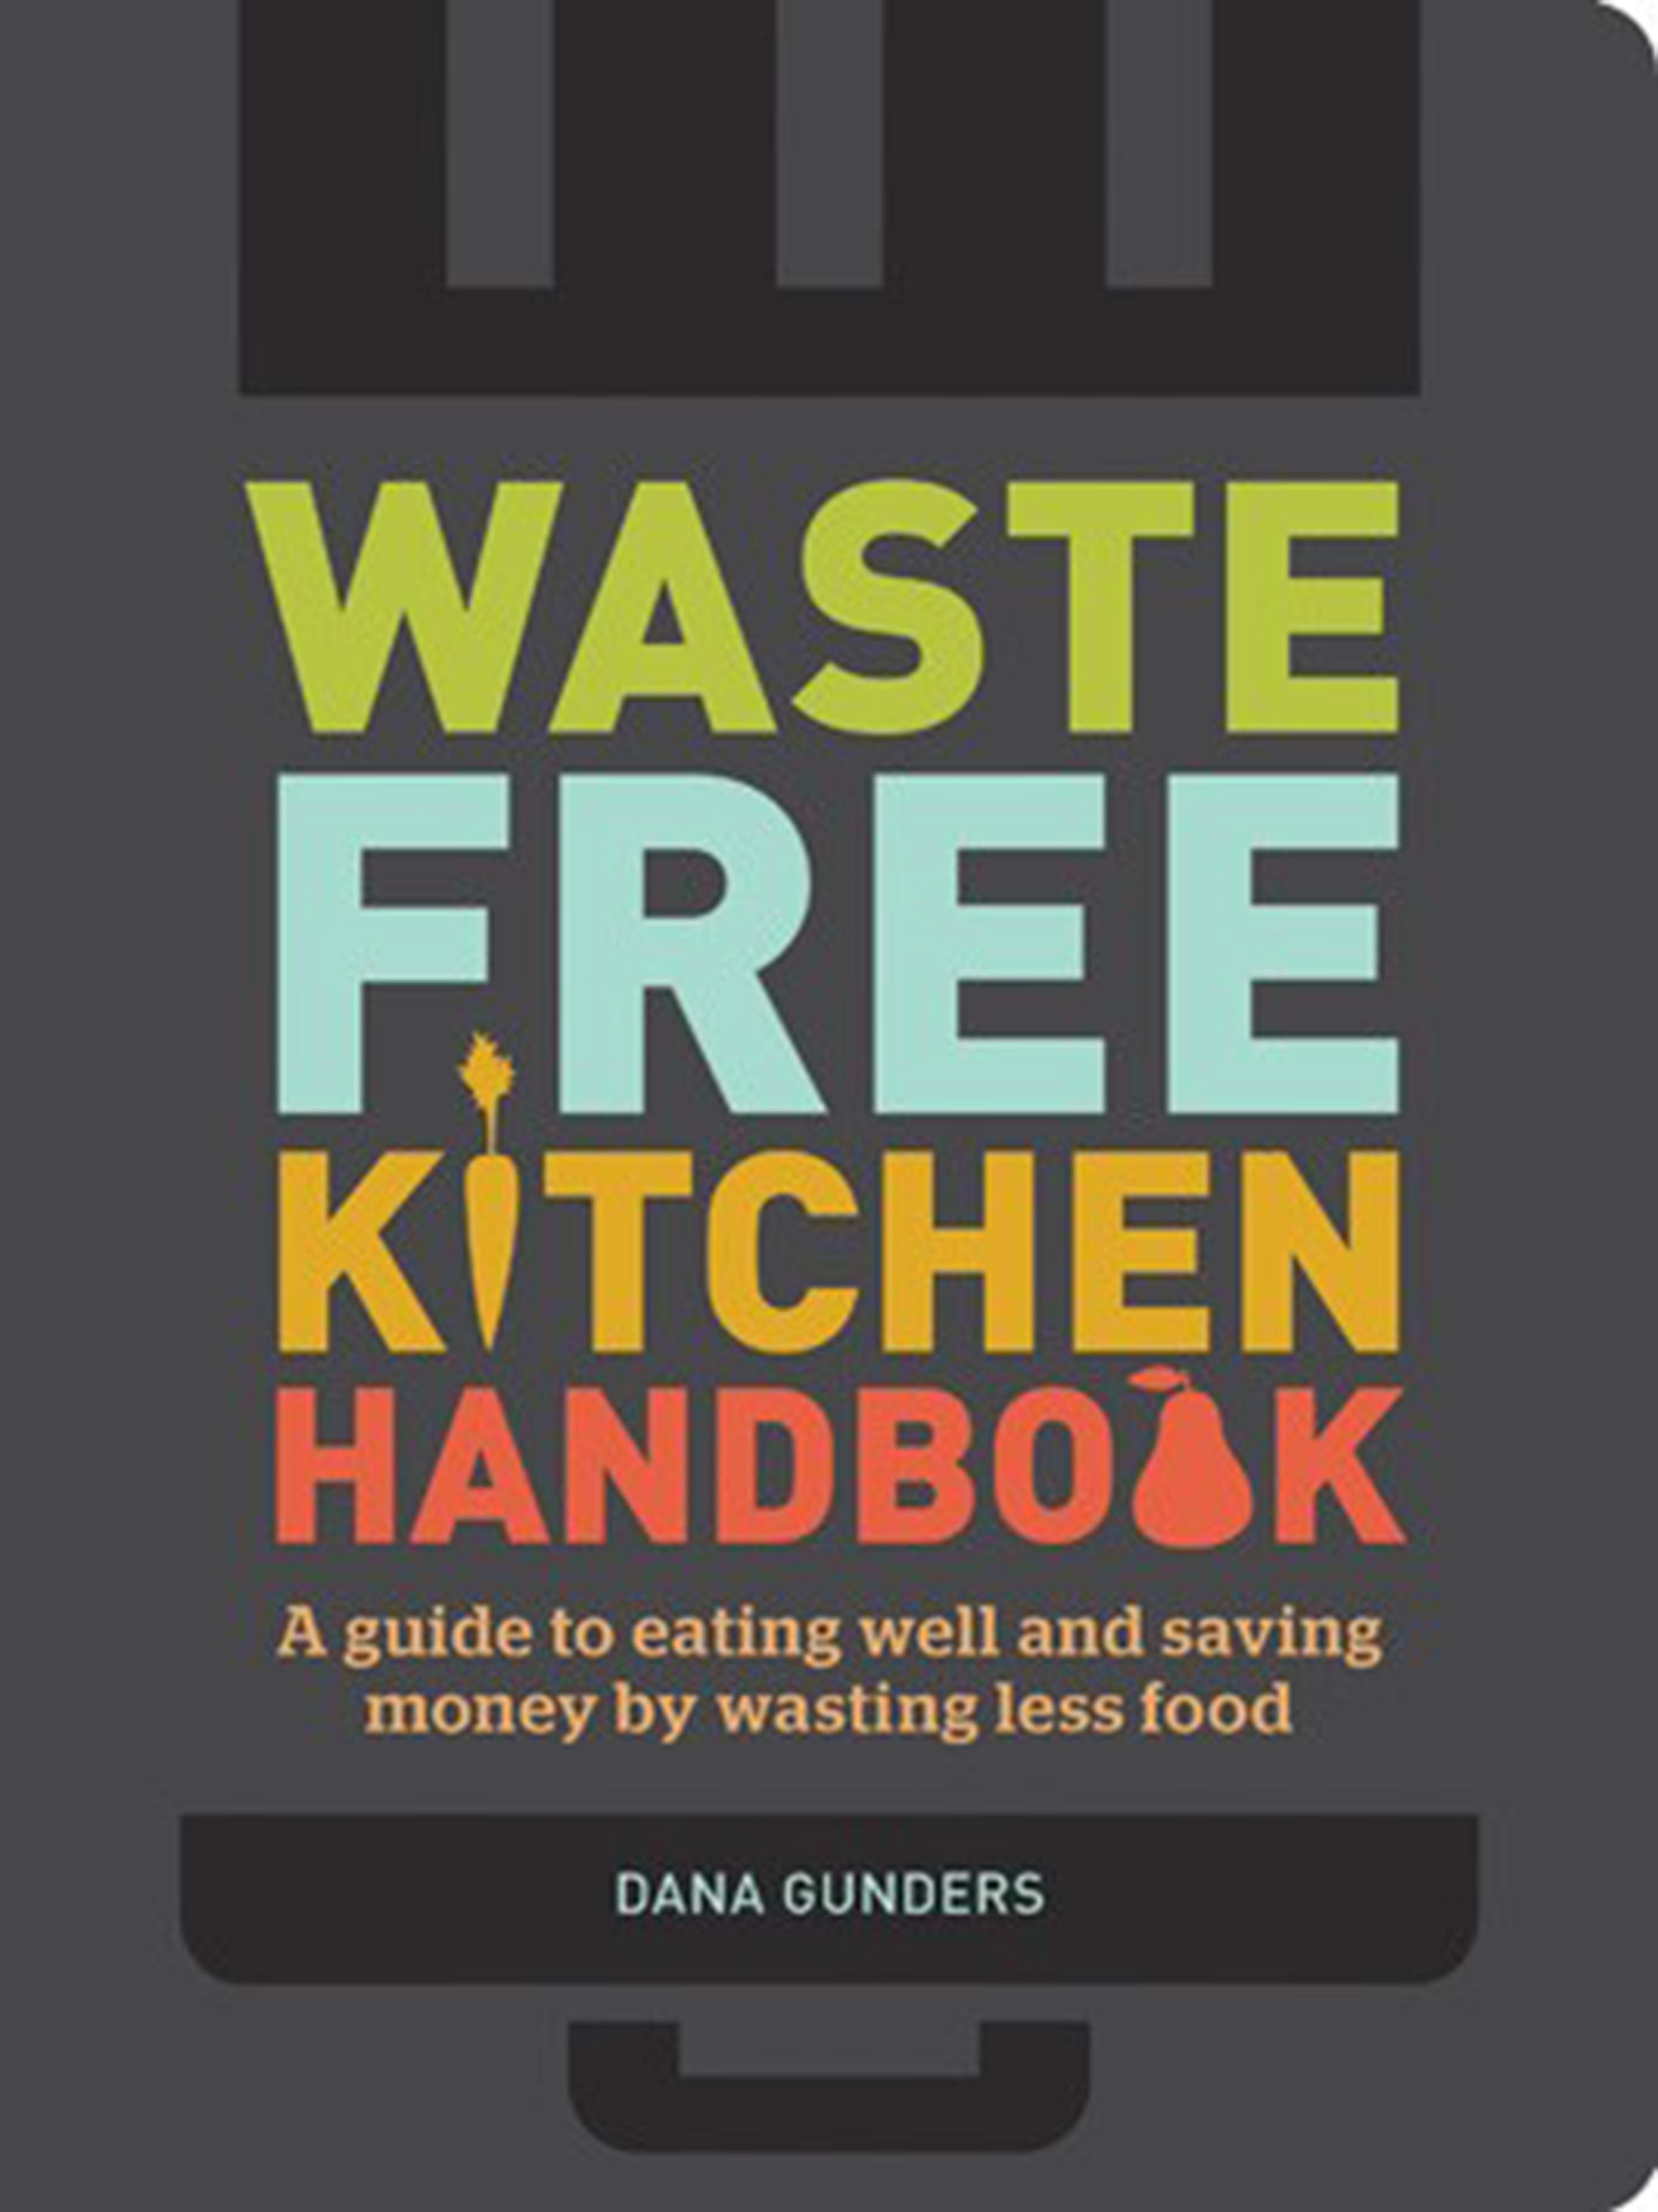 &quot;Waste Free Kitchen Handbook: A Guide to Eating Well and Saving Money by Wasting Less Food&quot; by Dana Gunders.